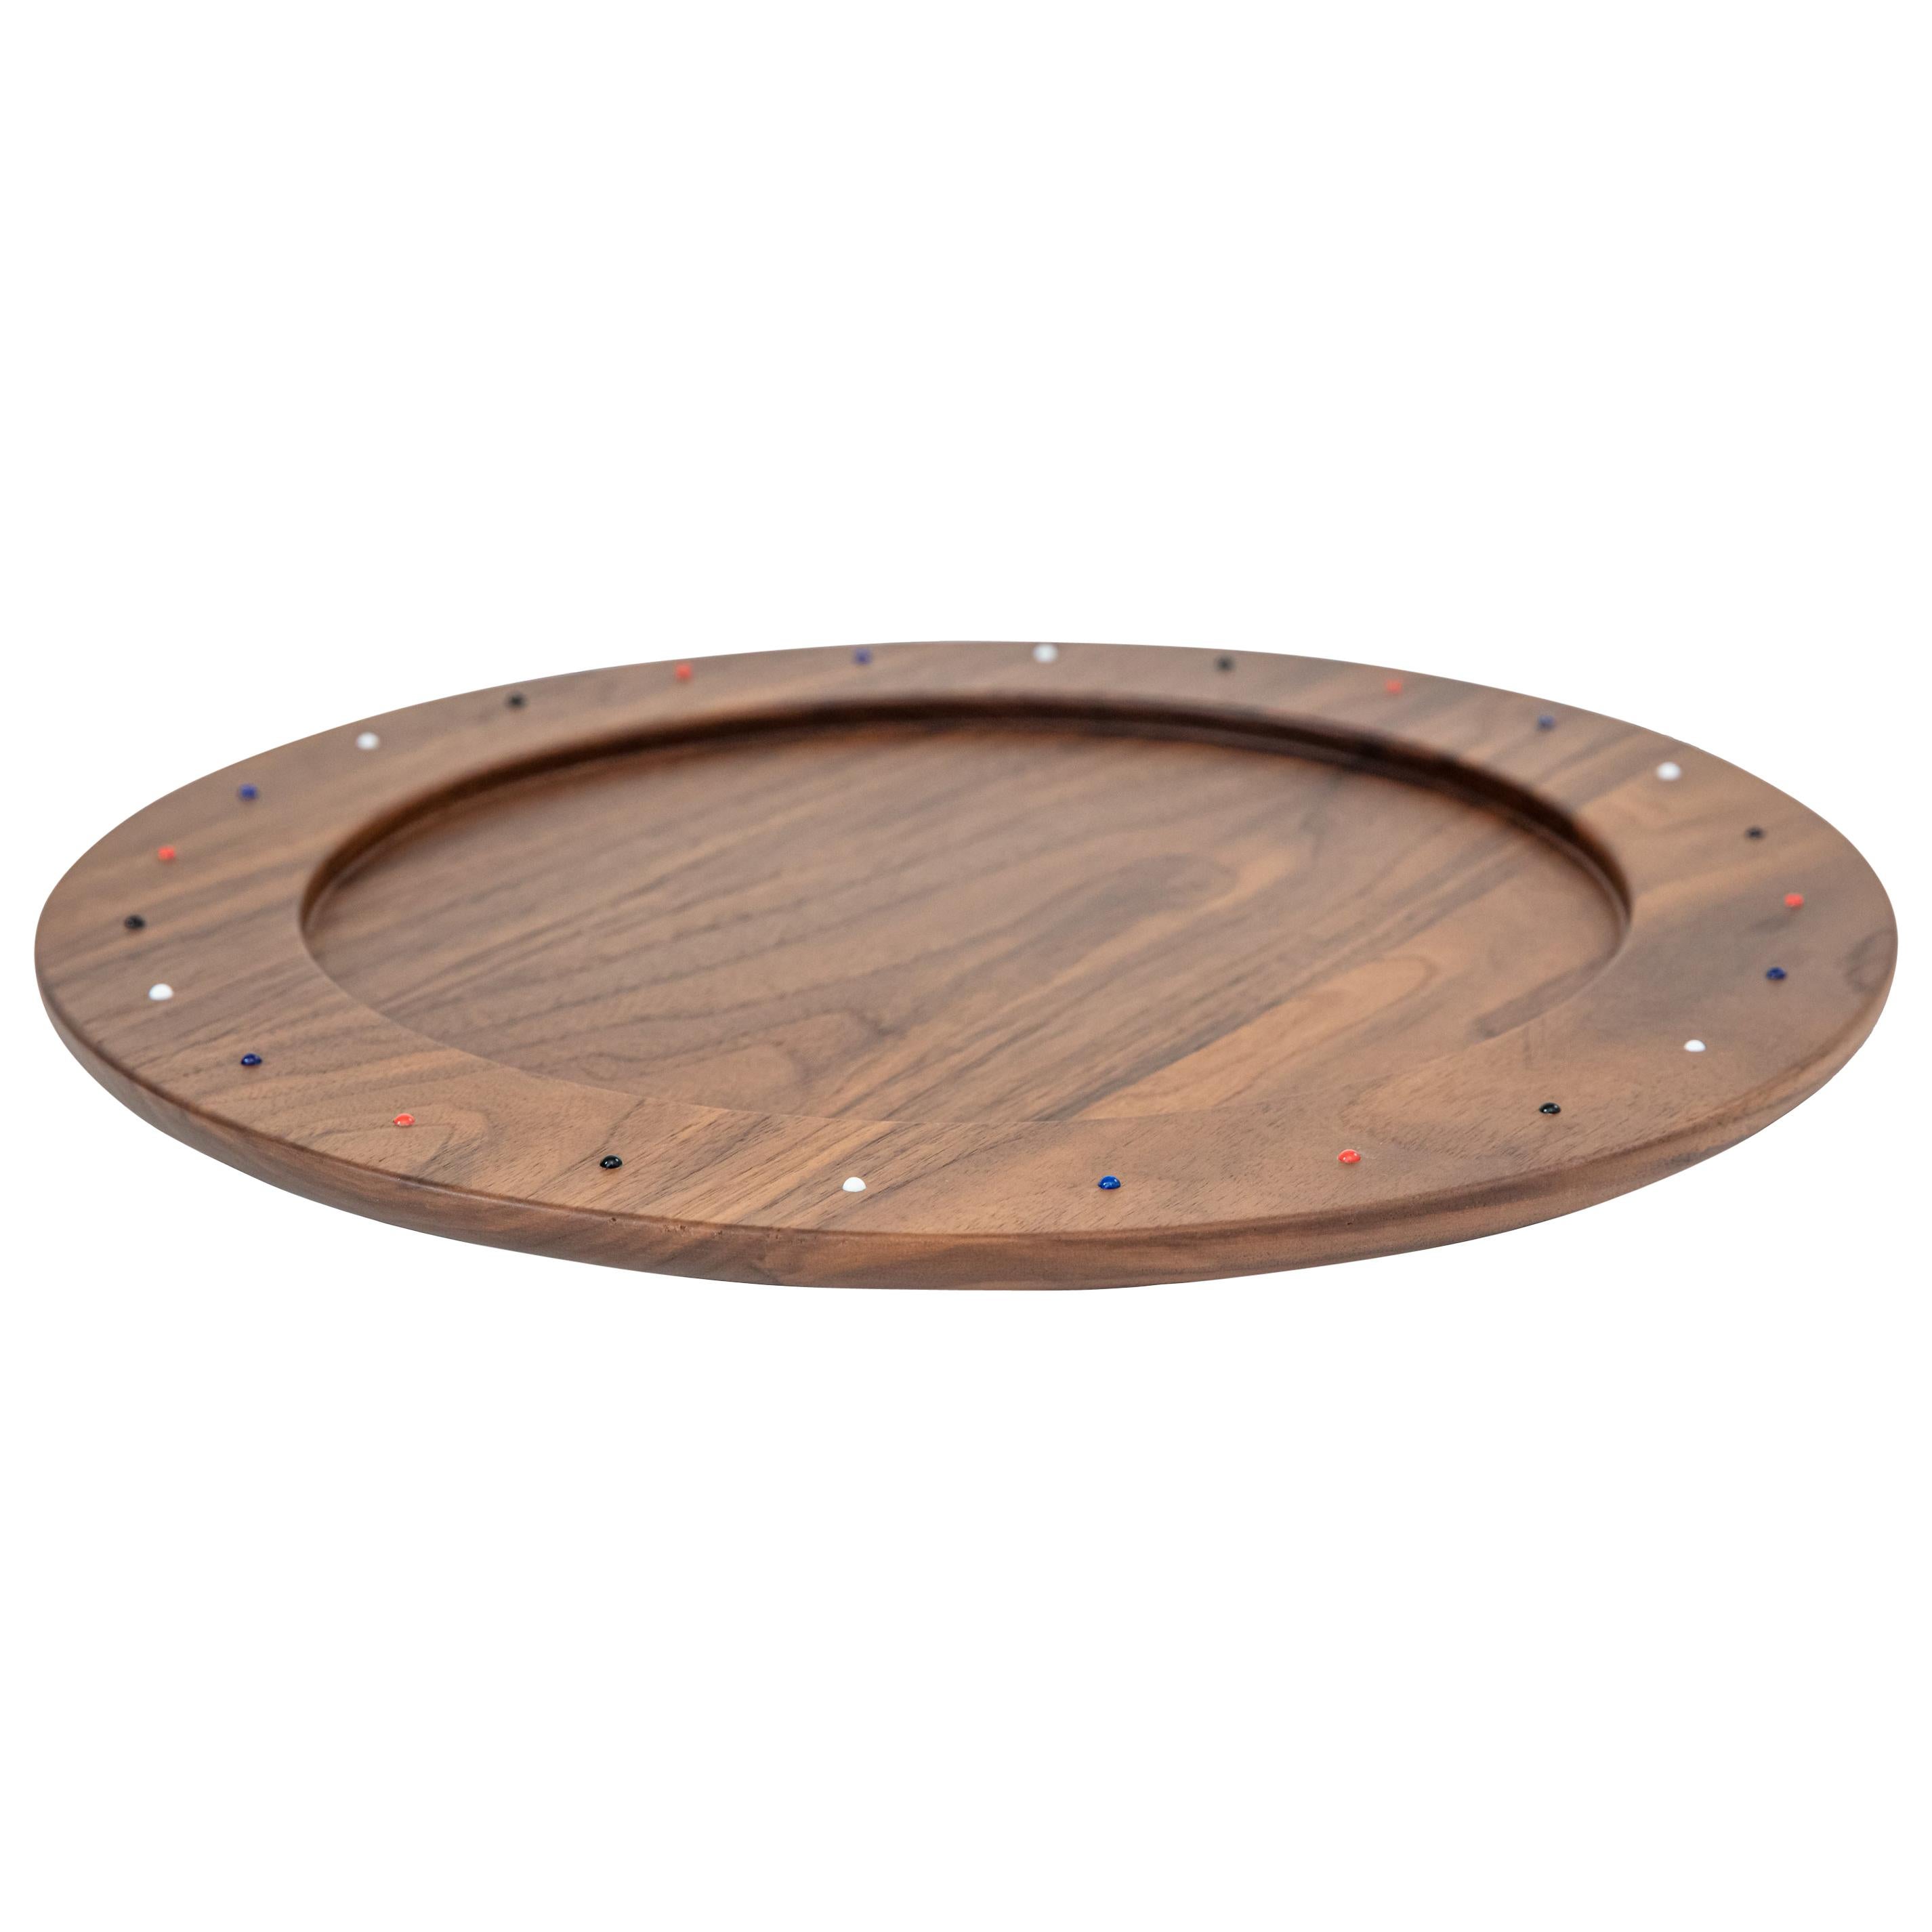 Wooden charger plate serving tray of walnut wood from the SoShiro Pok collection For Sale